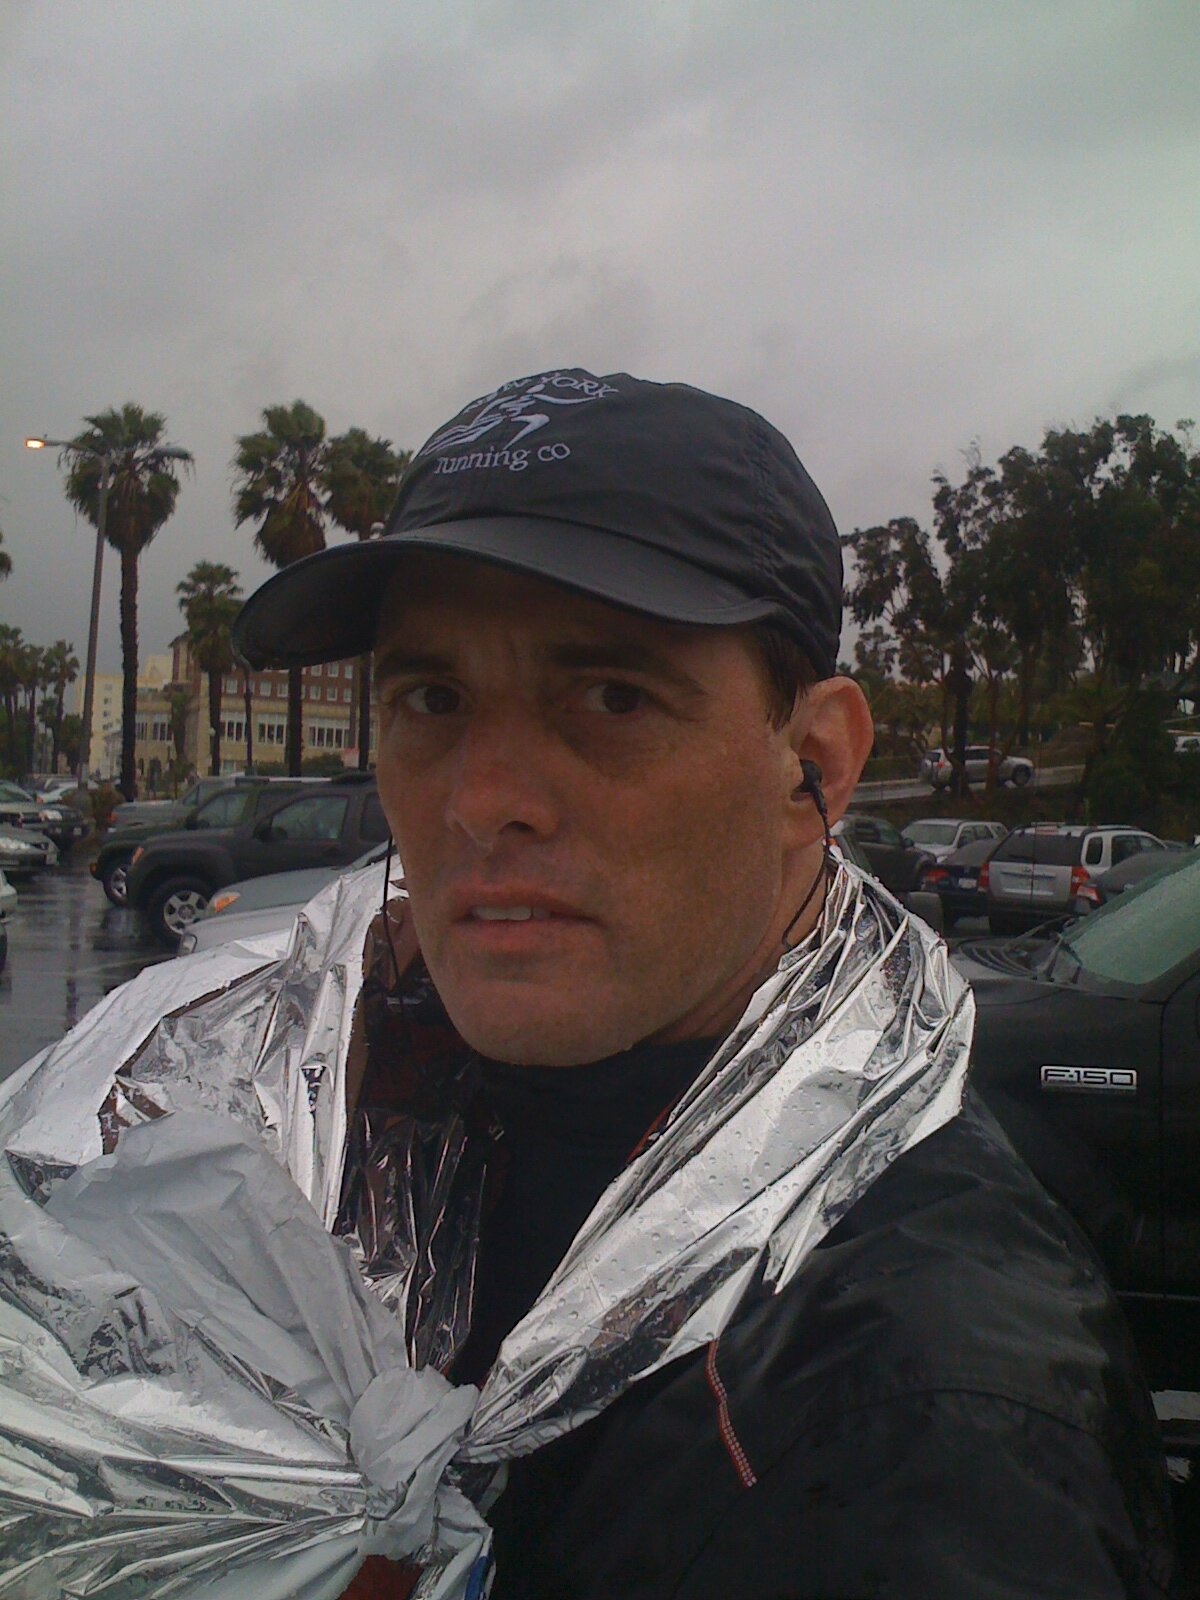  Frowning at the winds and rain post race. Someone poked me in the eye with an umbrella on my way to the car. Not the greatest “congratulations” after running 26.2 miles. 